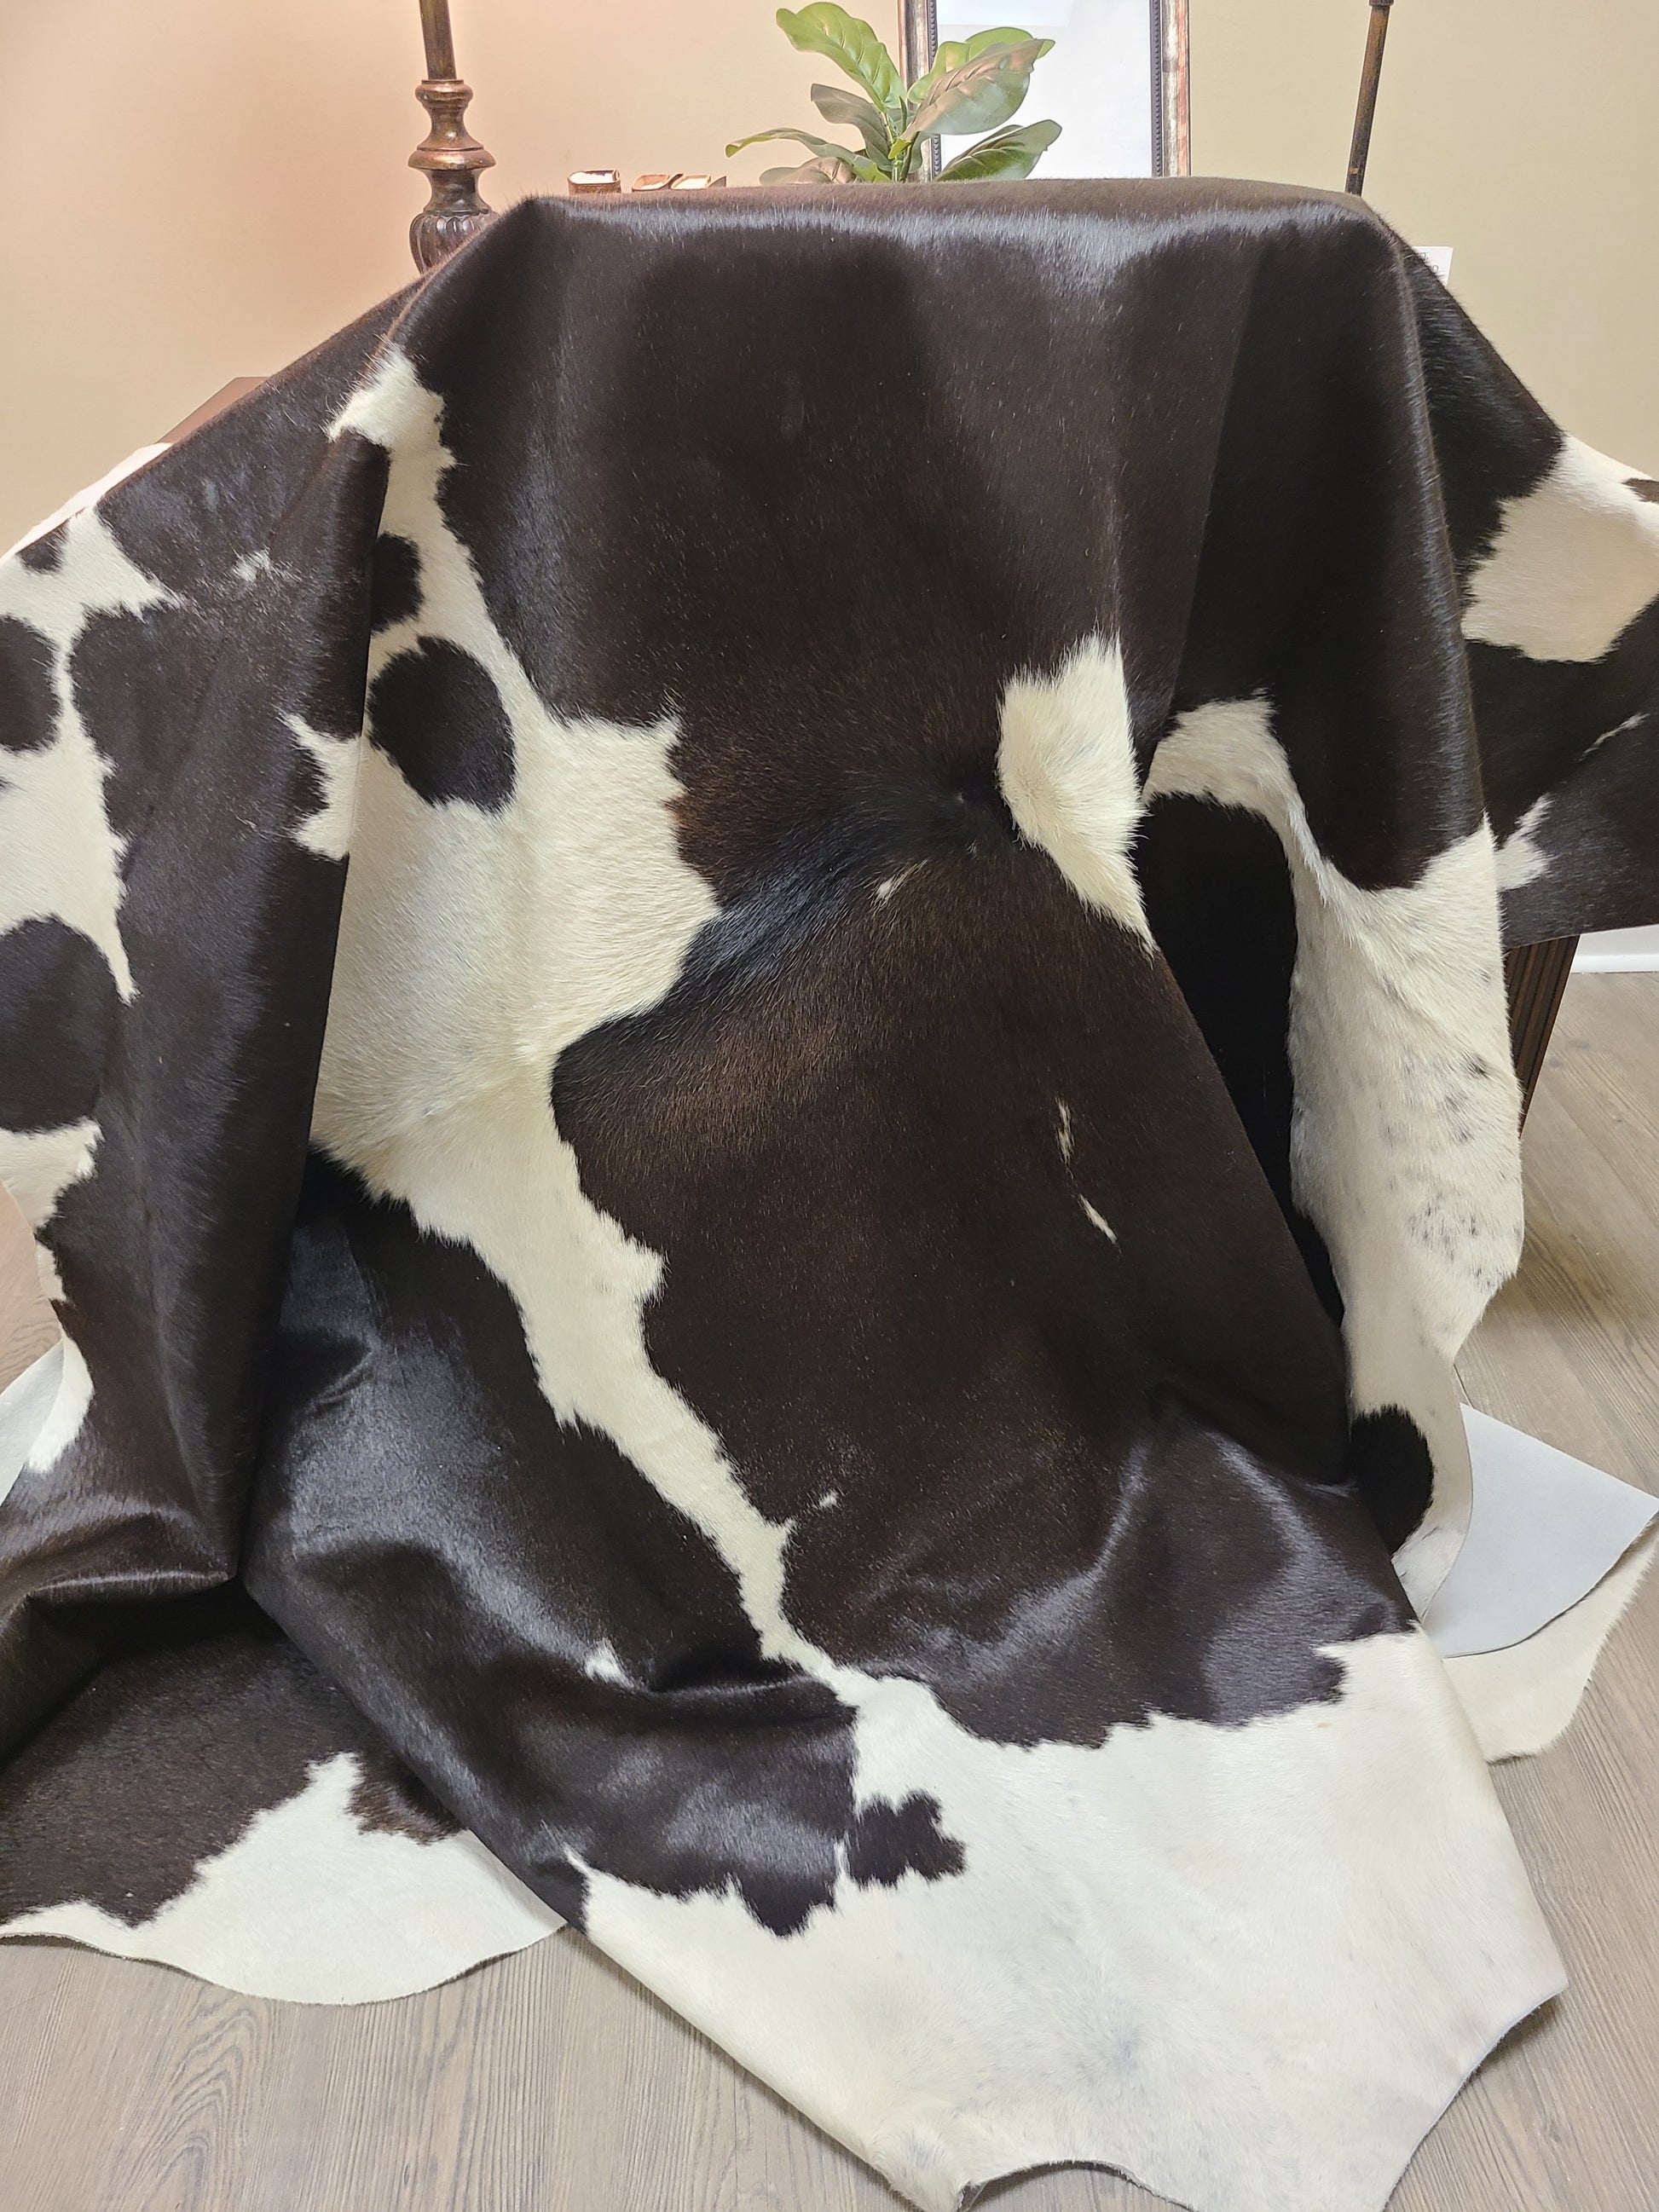 Brazilian Cowhide Rug - Black & White Spotted - 9 ft x 7 ft-Status Co. Leather Studio